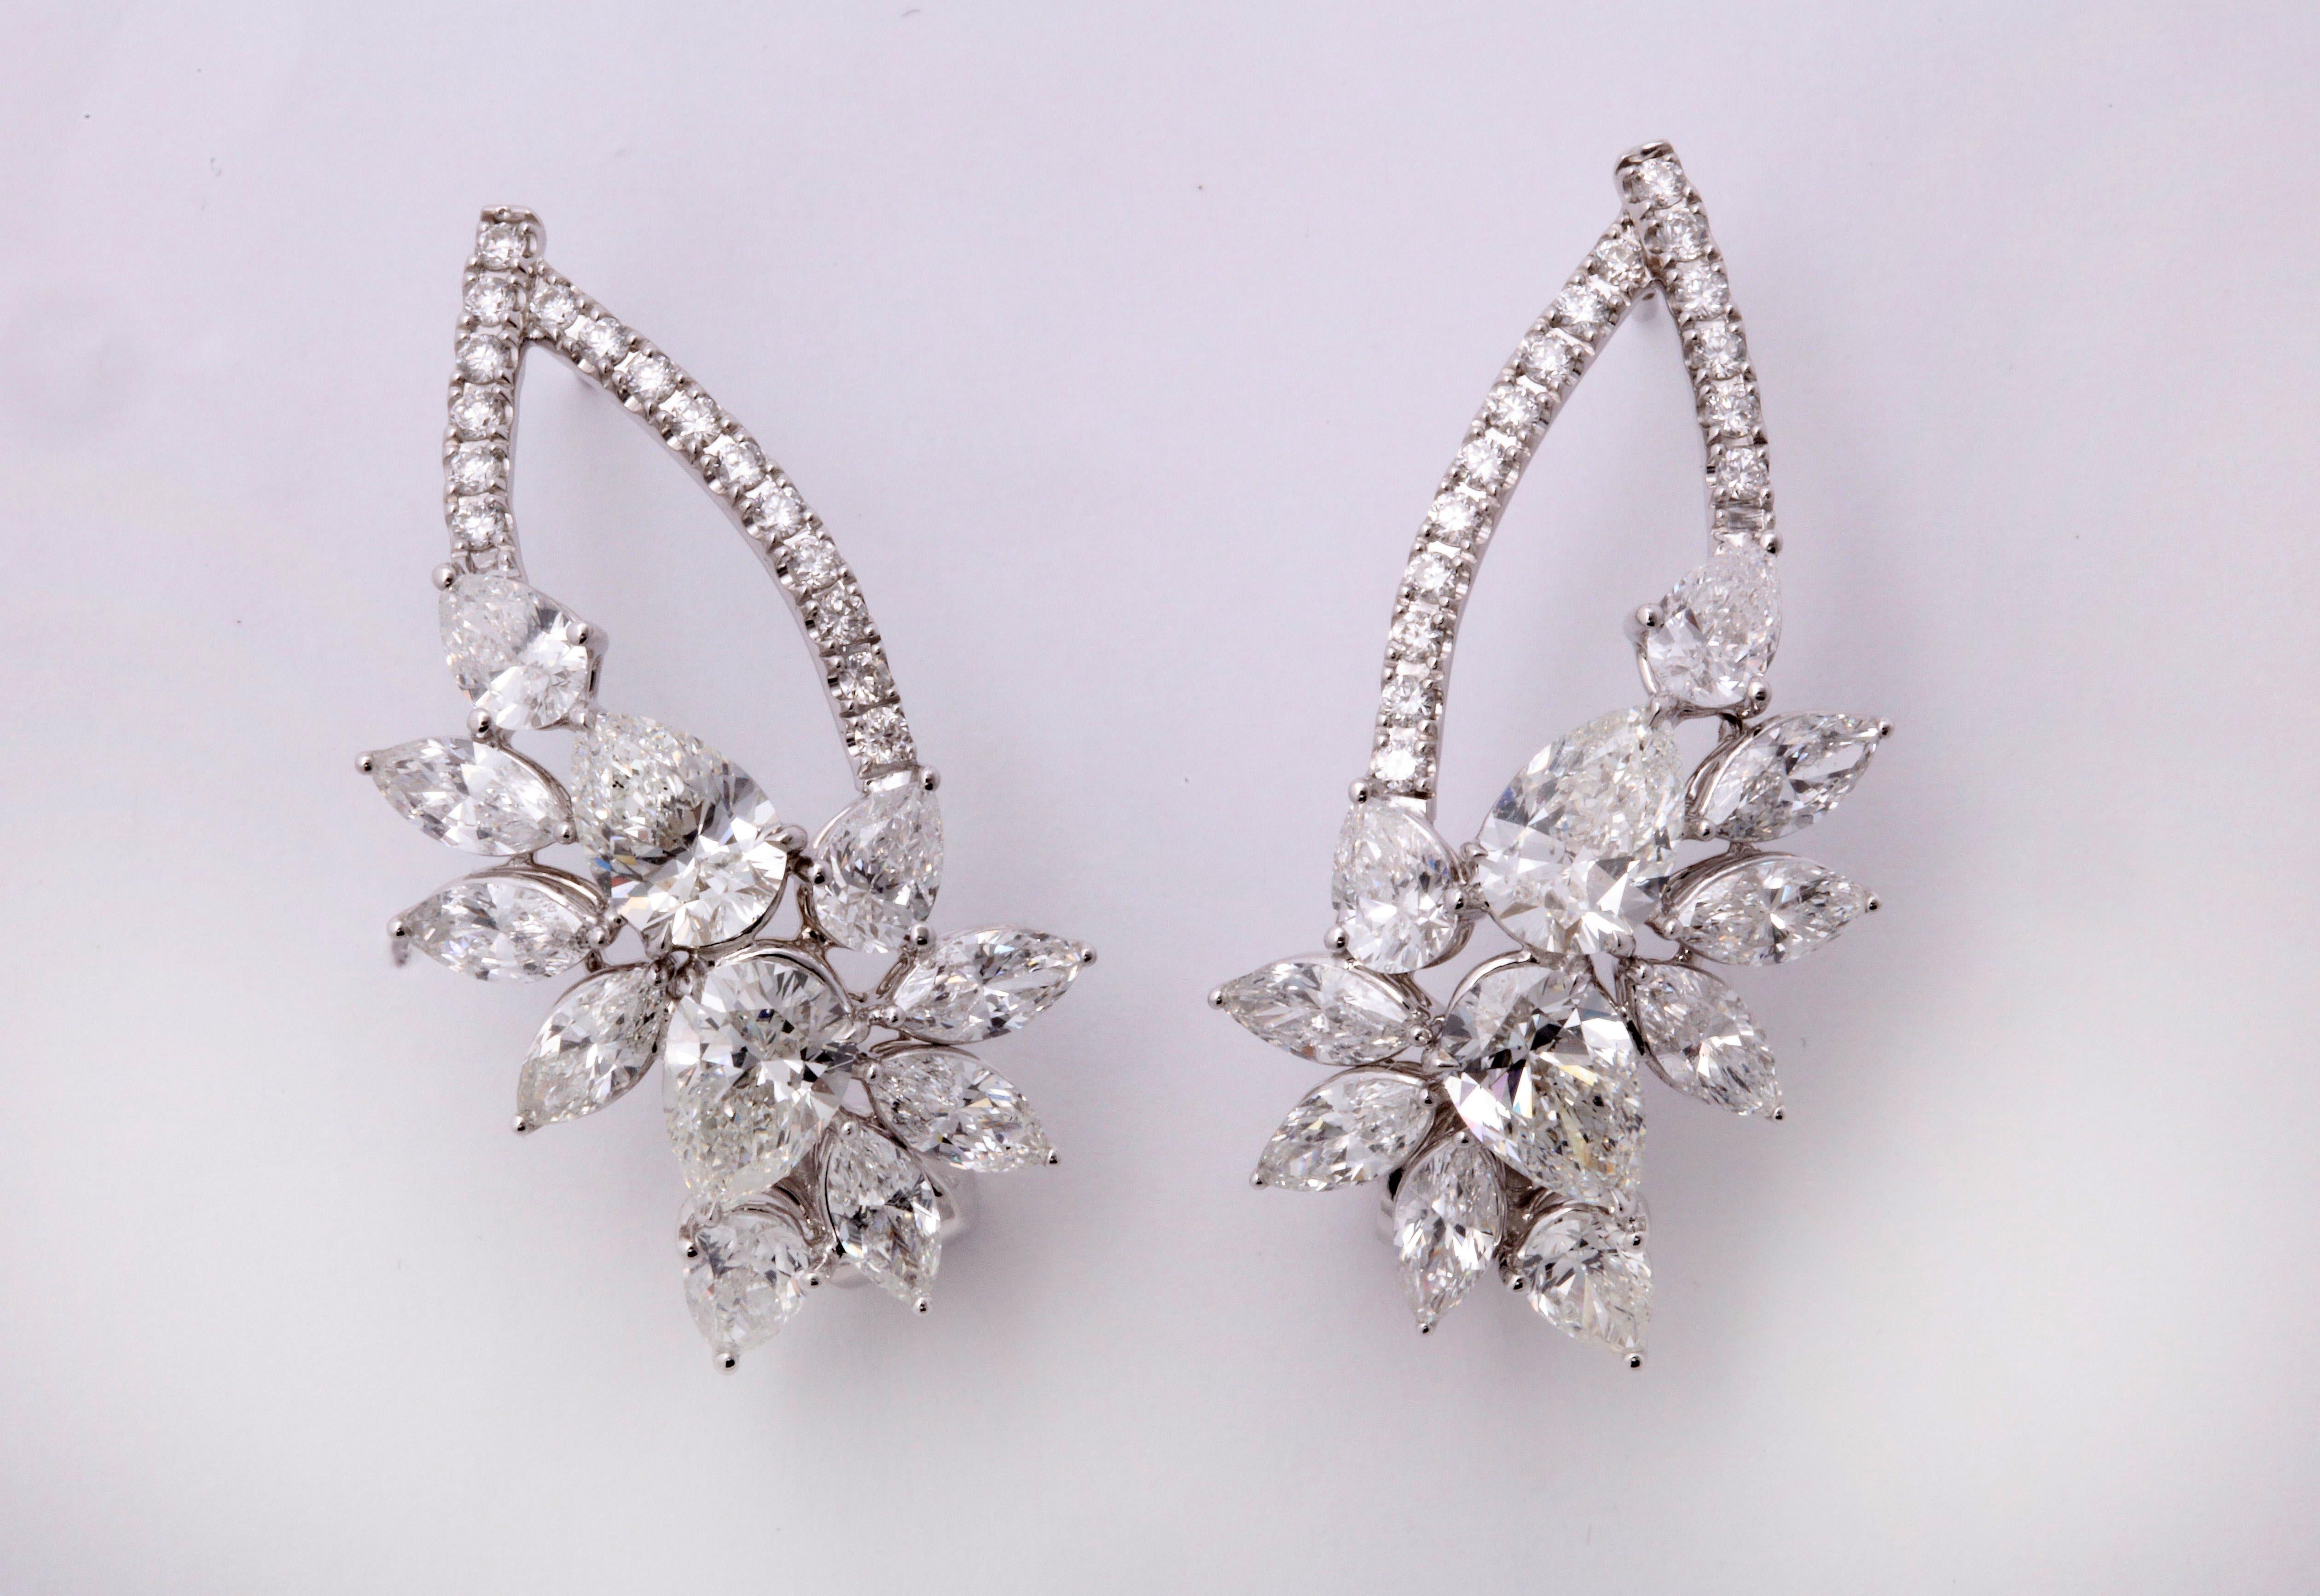 
A unique take on the classic cluster earring!

8.56 carats of white round, pear and marquise shaped diamonds set in 18k white gold.

The 